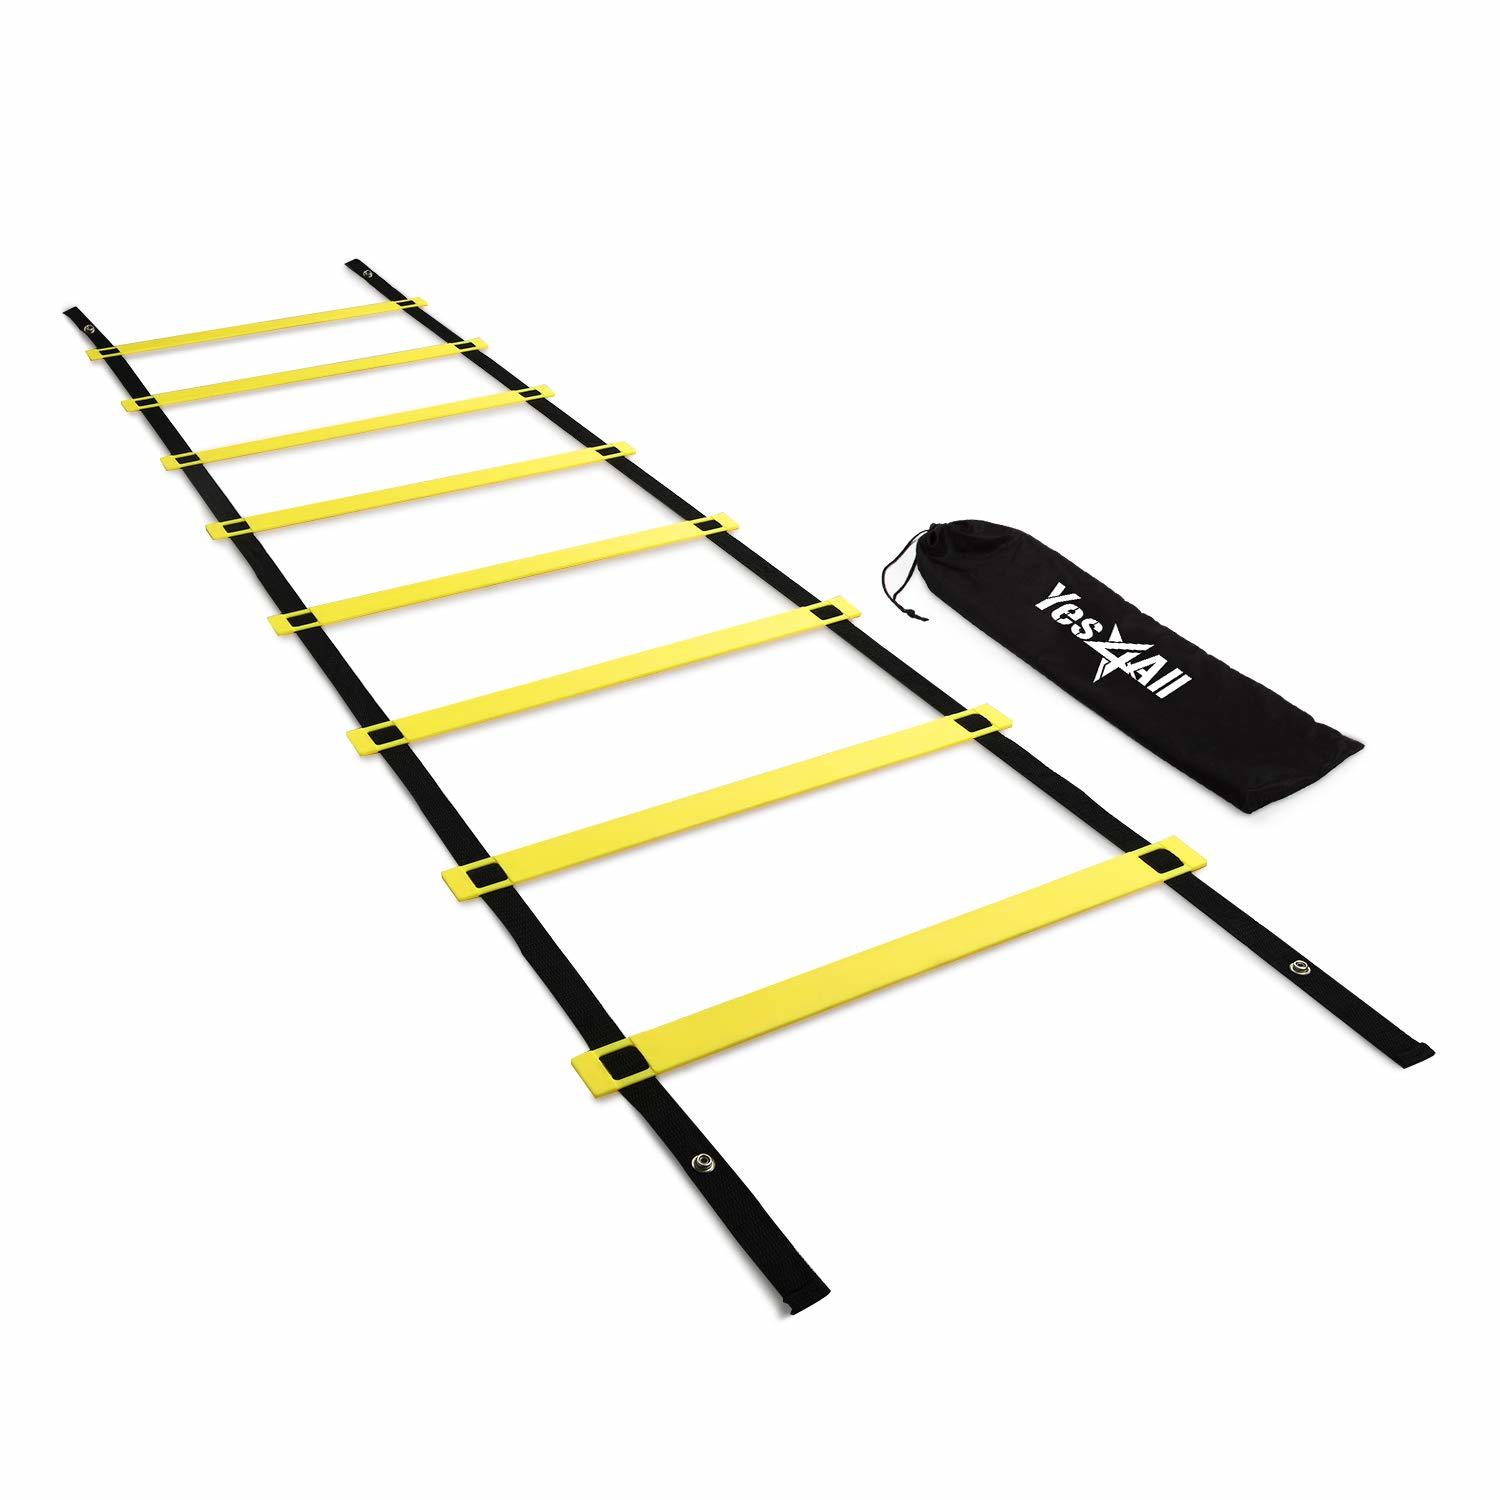 Yes4All Agility Ladder Speed Training Equipment - Speed Ladder for Kids and Adul - $15.19